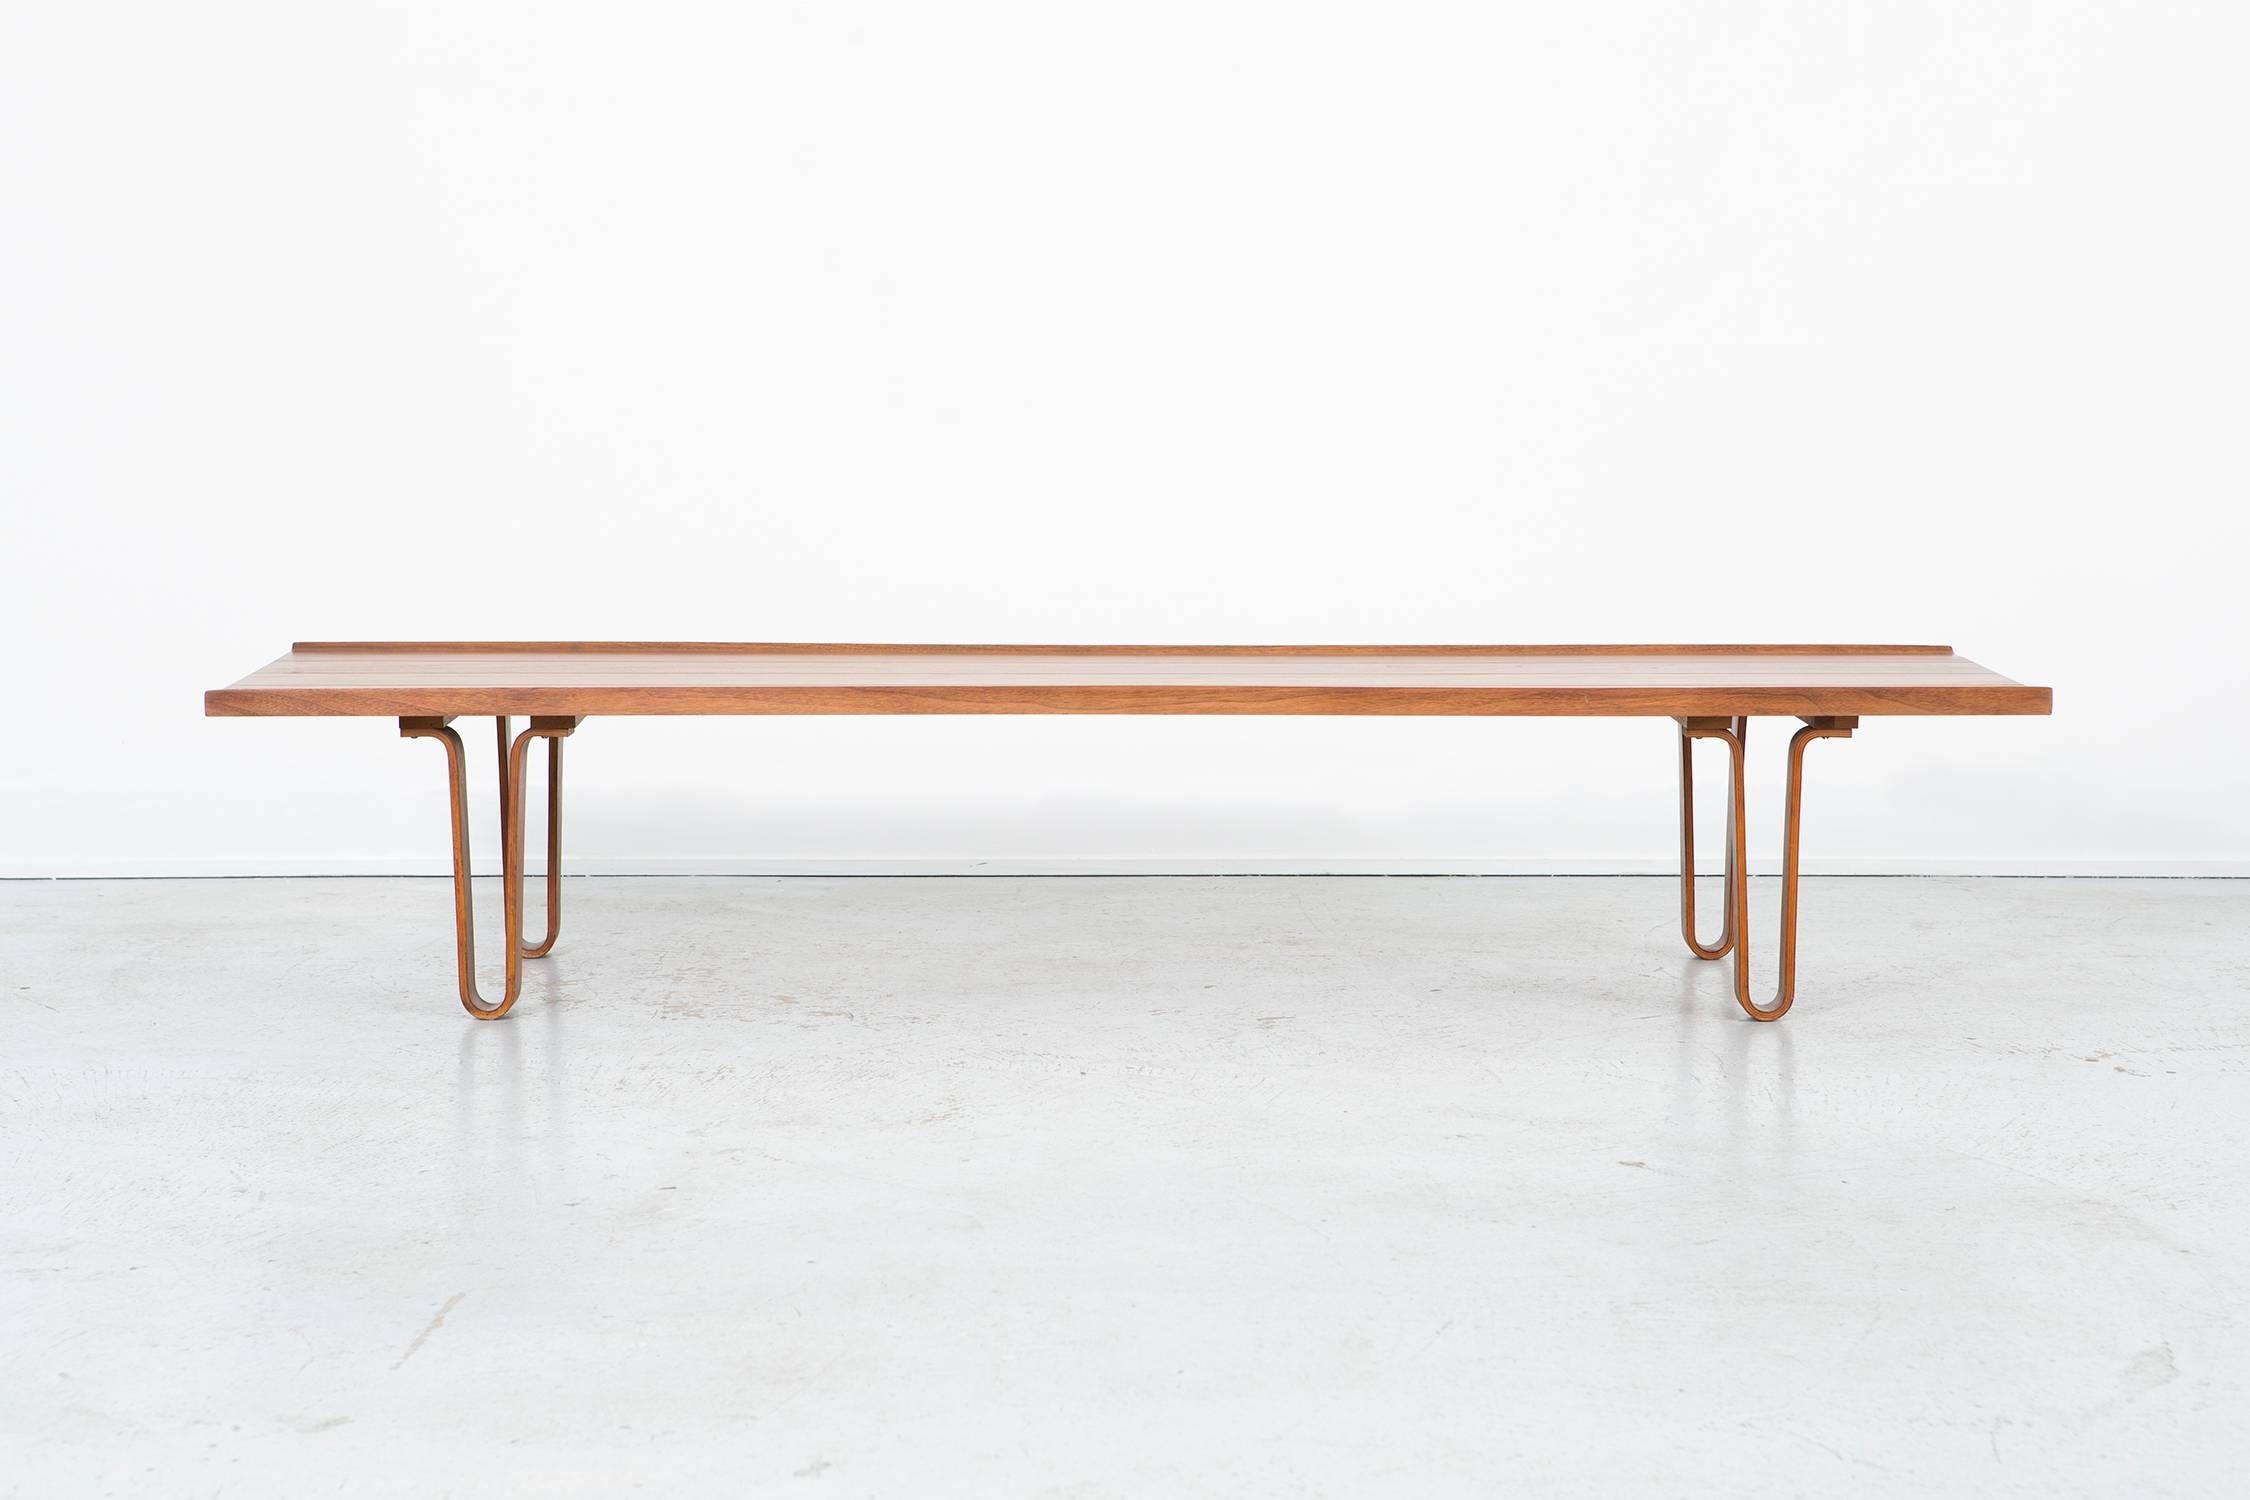 Long John bench or coffee table 

designed by Edward Wormley for Dunbar

USA, circa 1950s

refinished walnut

Measure: 13 5/16” H x 70” W x 19” D x seat 12” H.